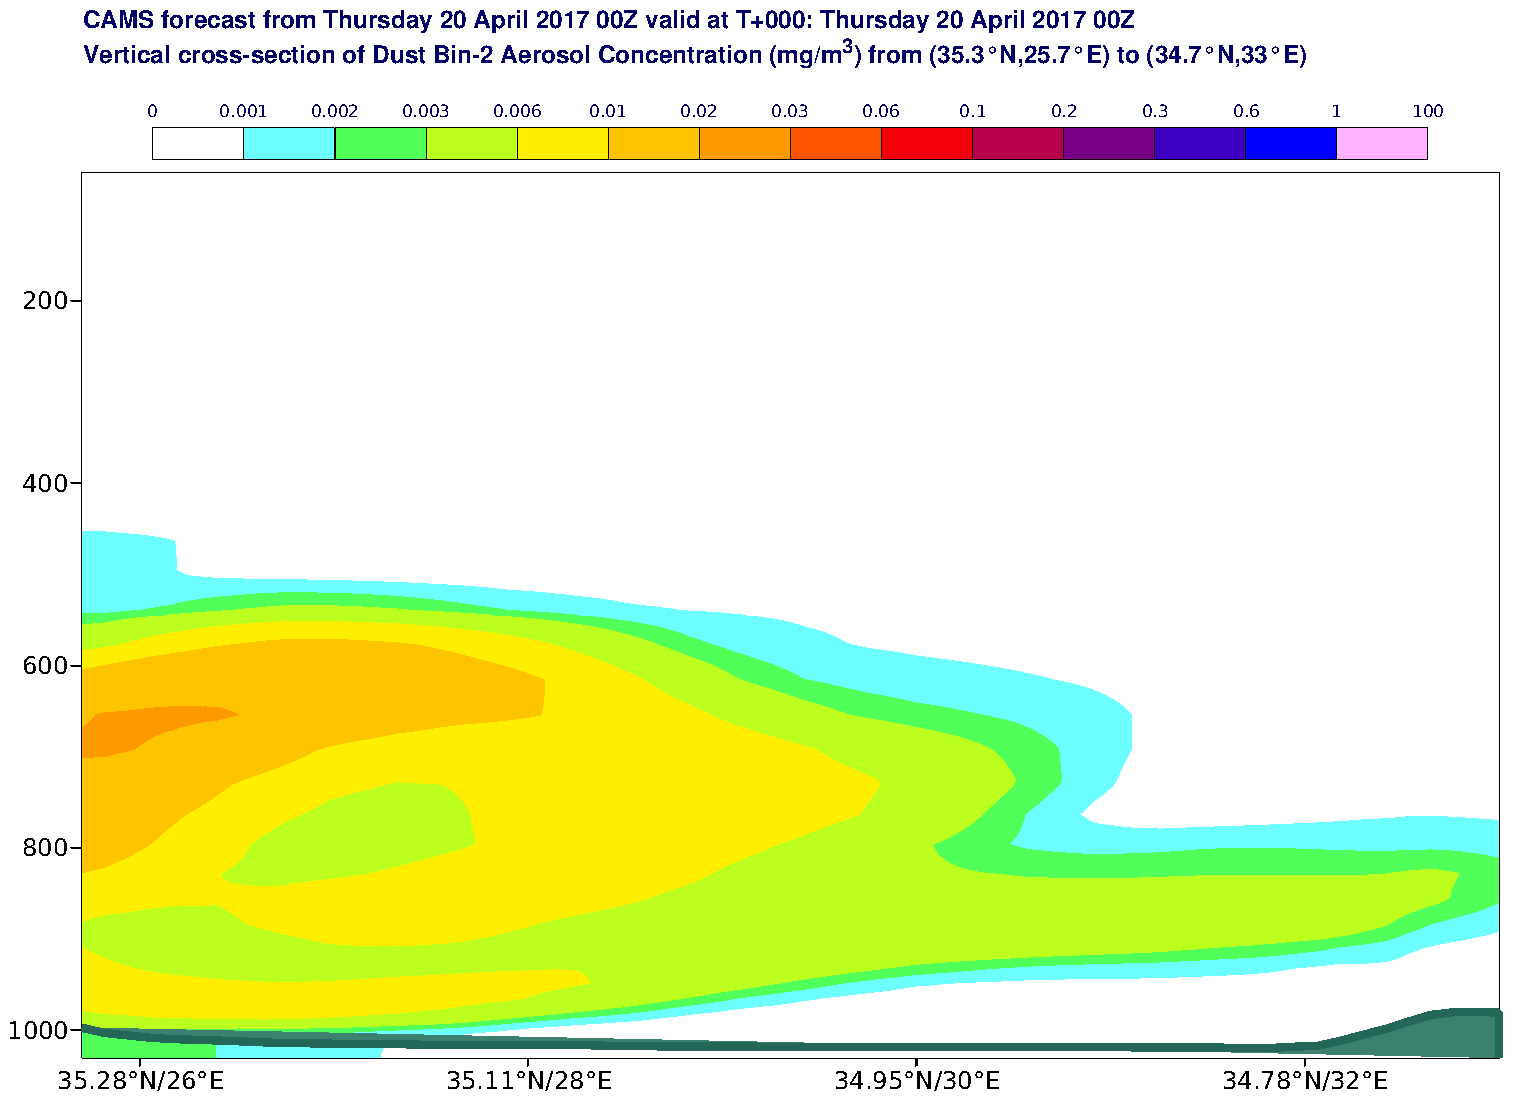 Vertical cross-section of Dust Bin-2 Aerosol Concentration (mg/m3) valid at T0 - 2017-04-20 00:00